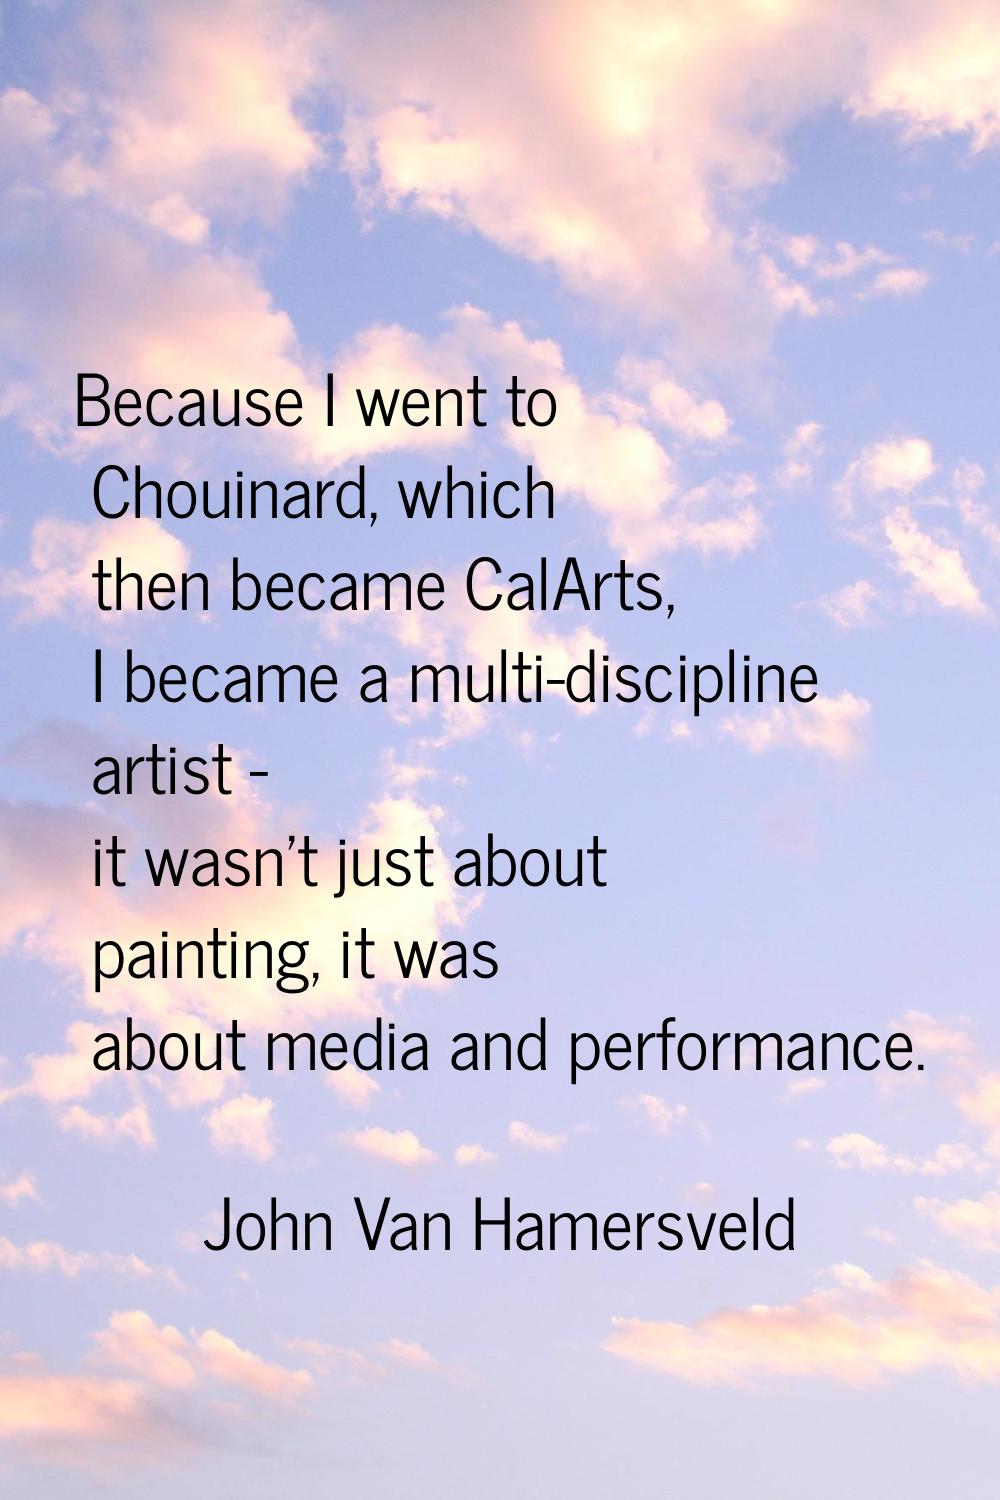 Because I went to Chouinard, which then became CalArts, I became a multi-discipline artist - it was